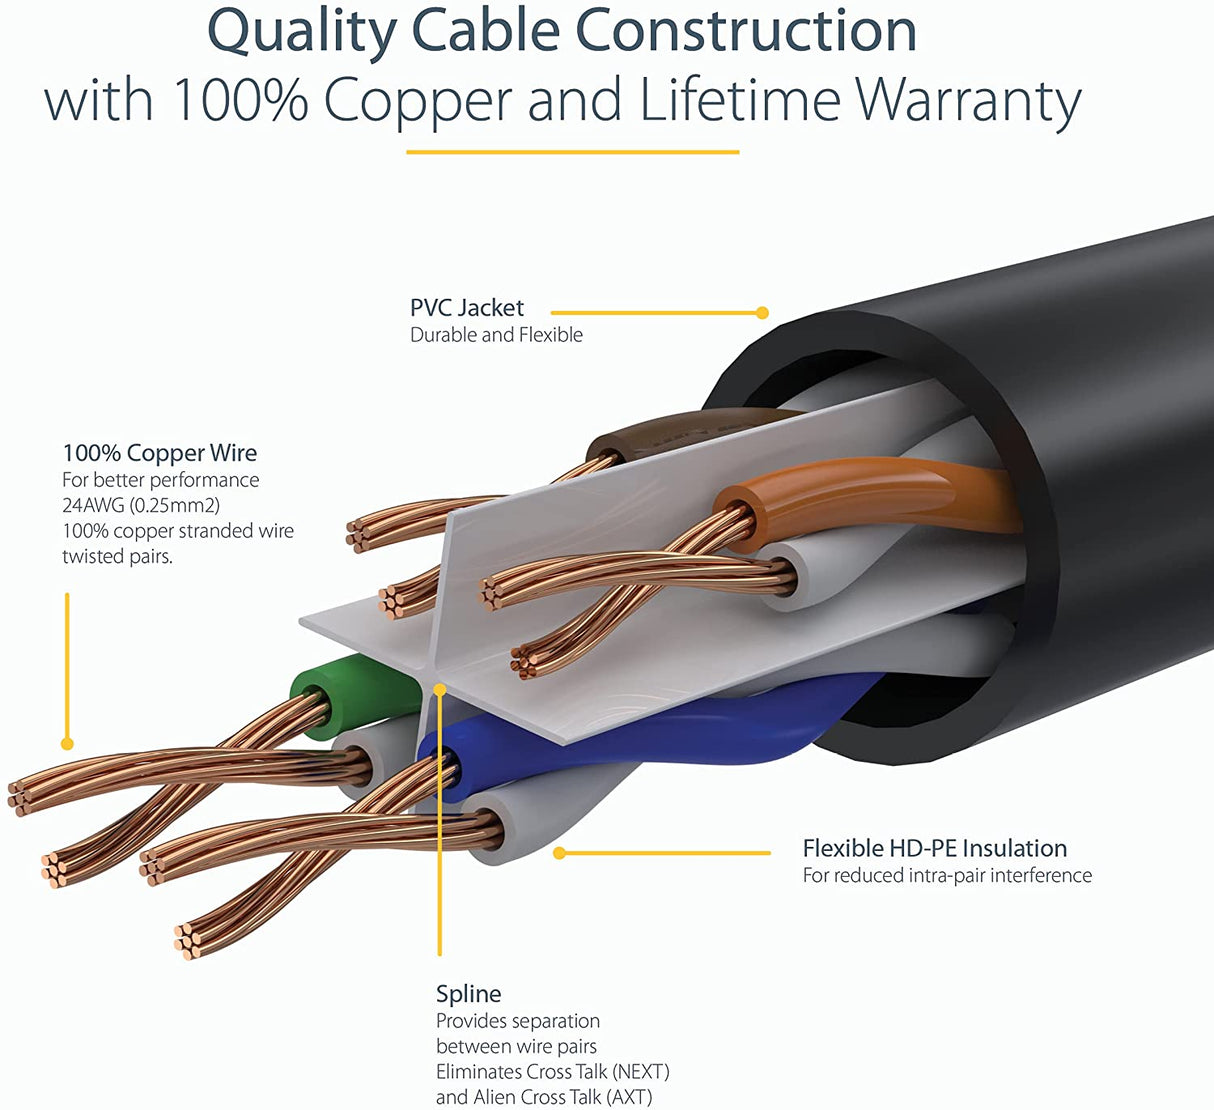 StarTech.com 25ft CAT6 Ethernet Cable - Black CAT 6 Gigabit Ethernet Wire -650MHz 100W PoE++ RJ45 UTP Category 6 Network/Patch Cord Snagless w/Strain Relief Fluke Tested UL/TIA Certified (N6PATCH25BK) Black 25 ft / 7.6 m 1 Pack